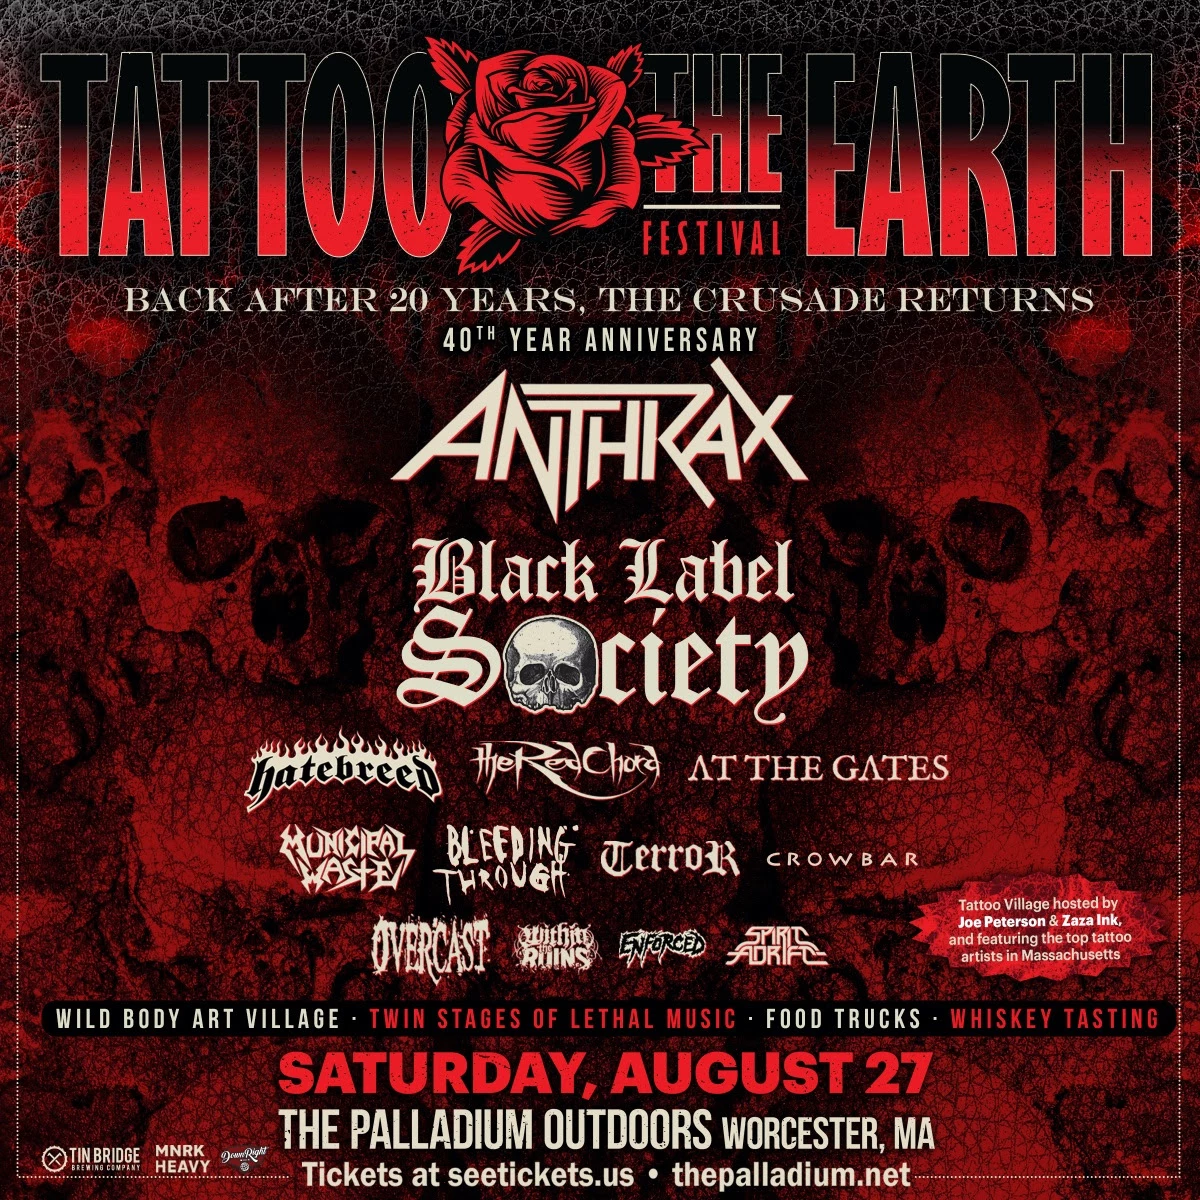 Tattoo the Earth Festivals 2022 Return Expands With More Bands